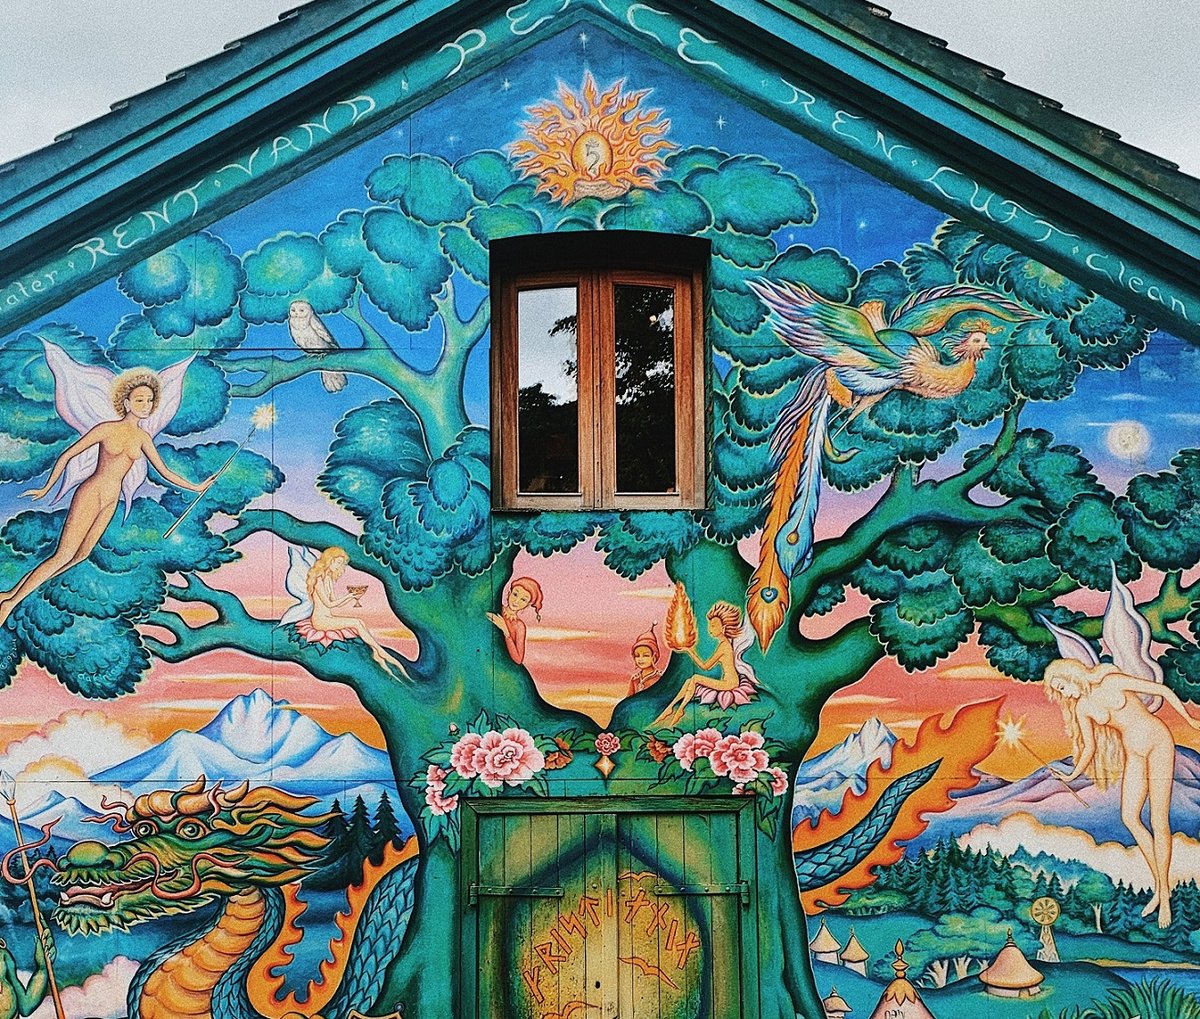 Colorful art painted on a building in Christiania